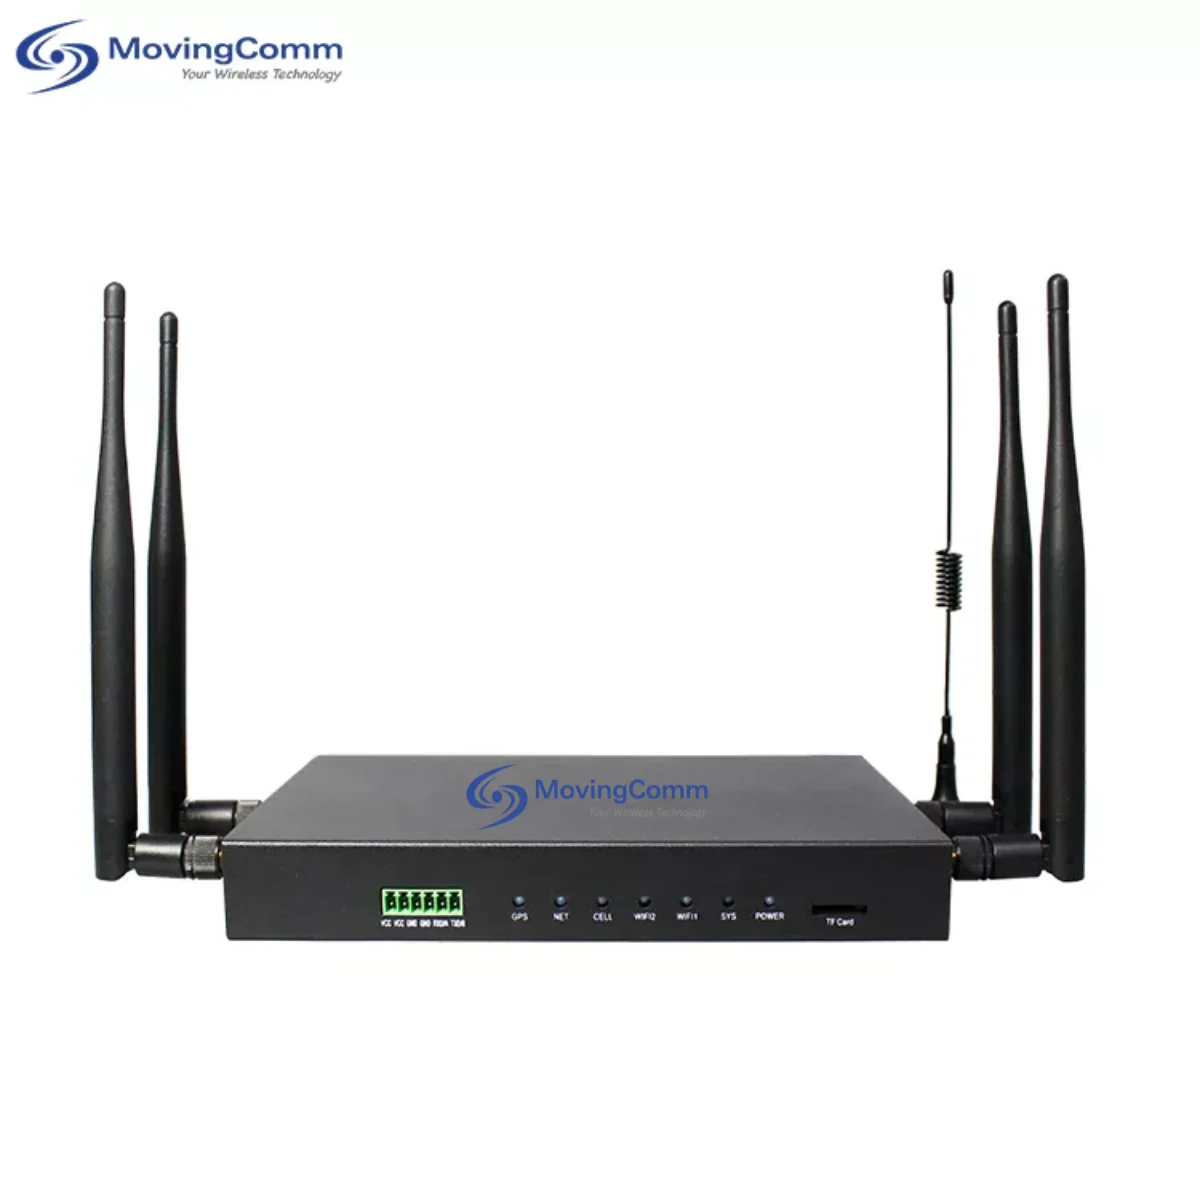 Muscular prince Chronicle Rts Newest 5g Industrial Router With Sim Card Slot Wireless Cpe Modem  Support 5g/4g Lte Network Mt7621 Chipset Ddr2 1gbit 128mbi - Buy 5g  Industrial Router,Router With Sim Card,Cpe Modem Product on